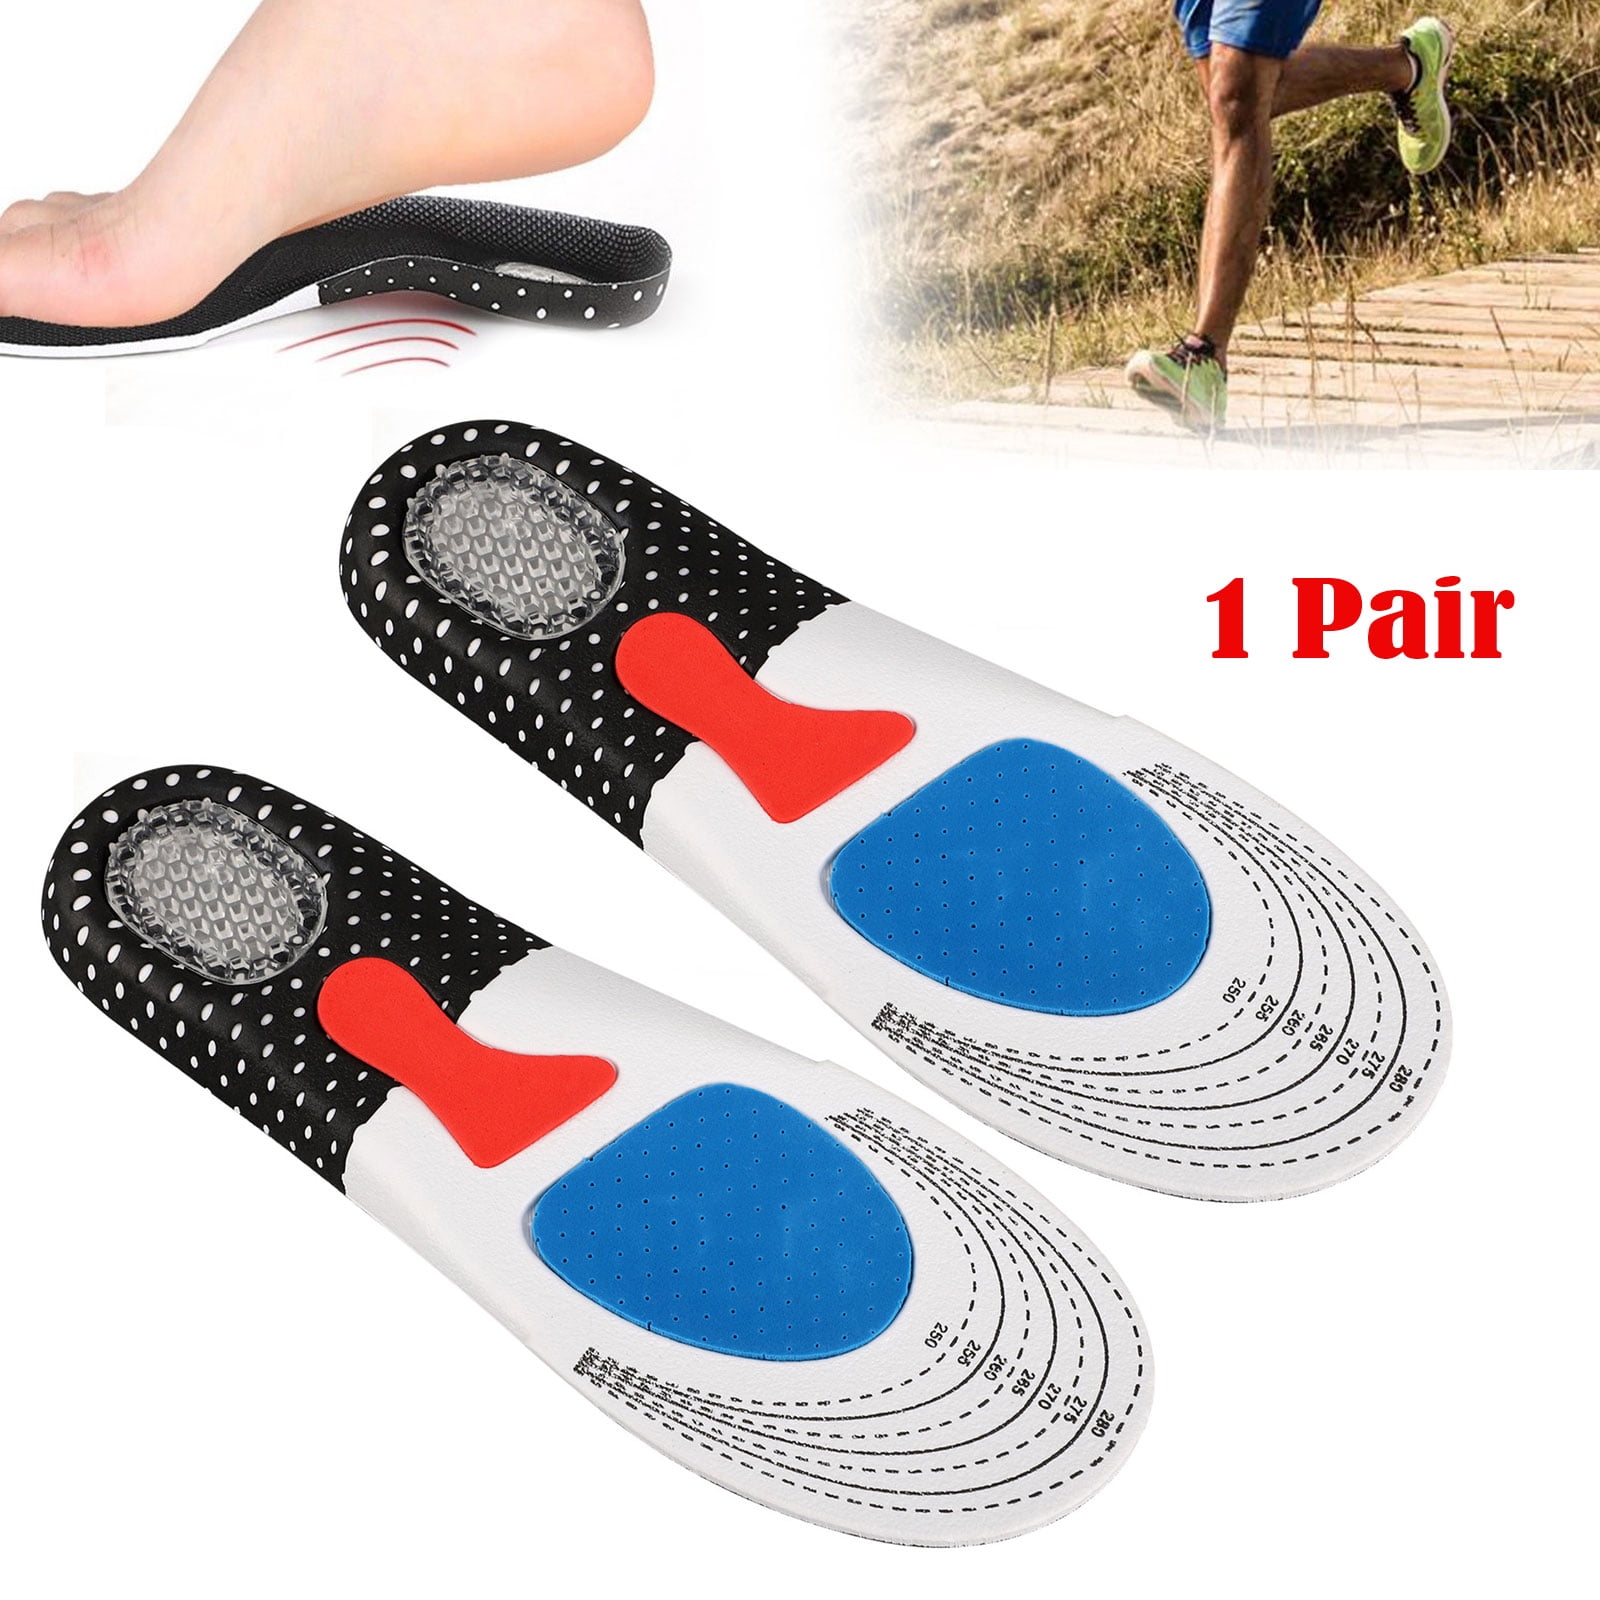 2 Pairs Foot Care Shoes Inserts Pads Sole Insole Men Women Plantar Fasciitis 